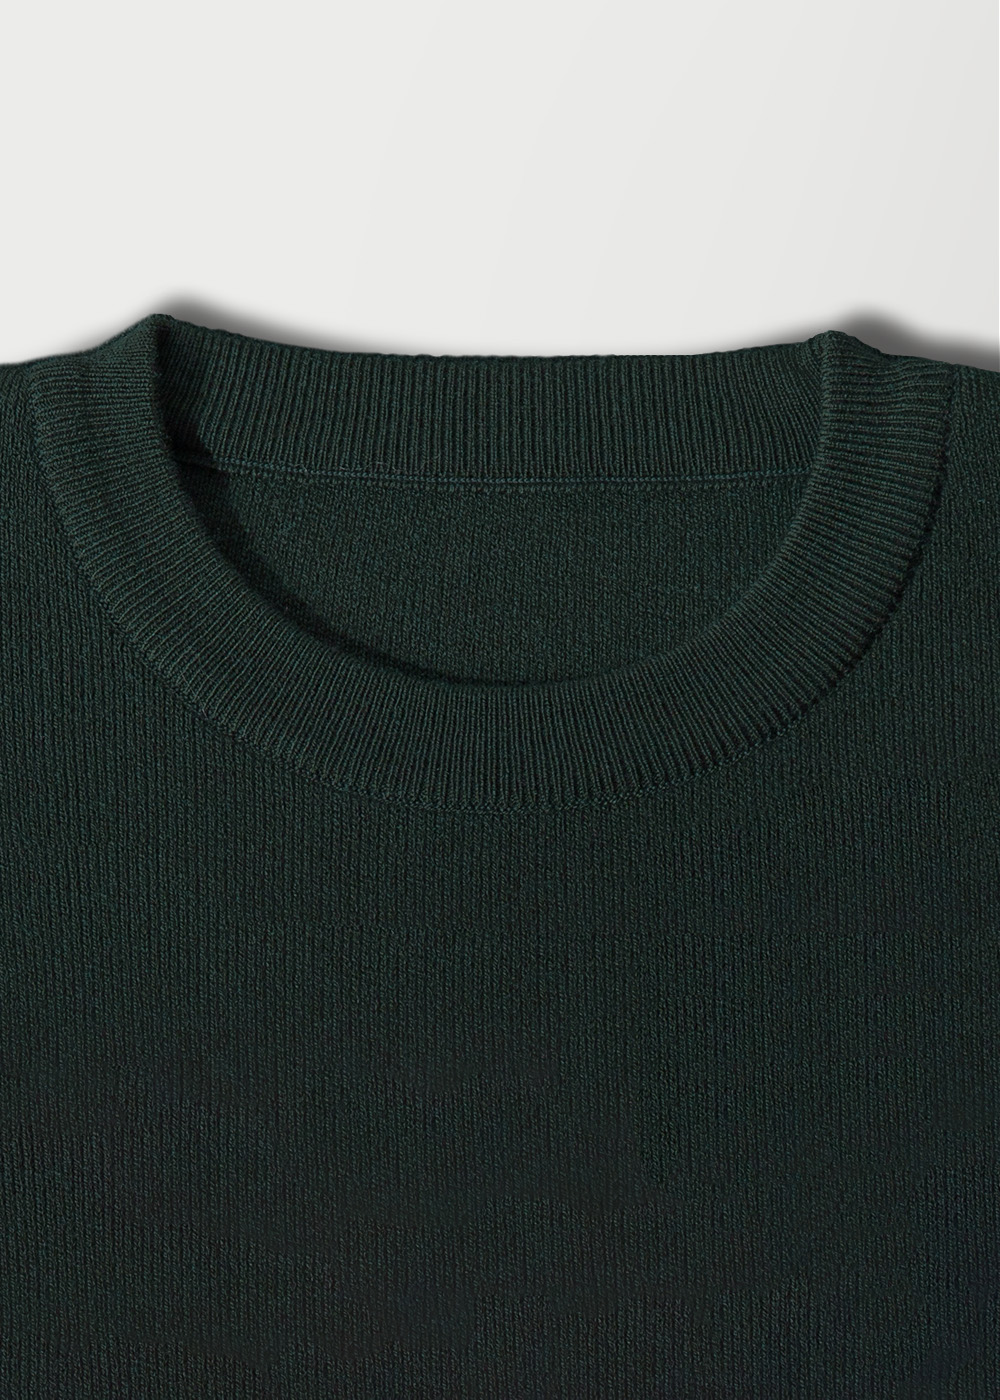 Wool Blended Casual Crewneck Knit _ green